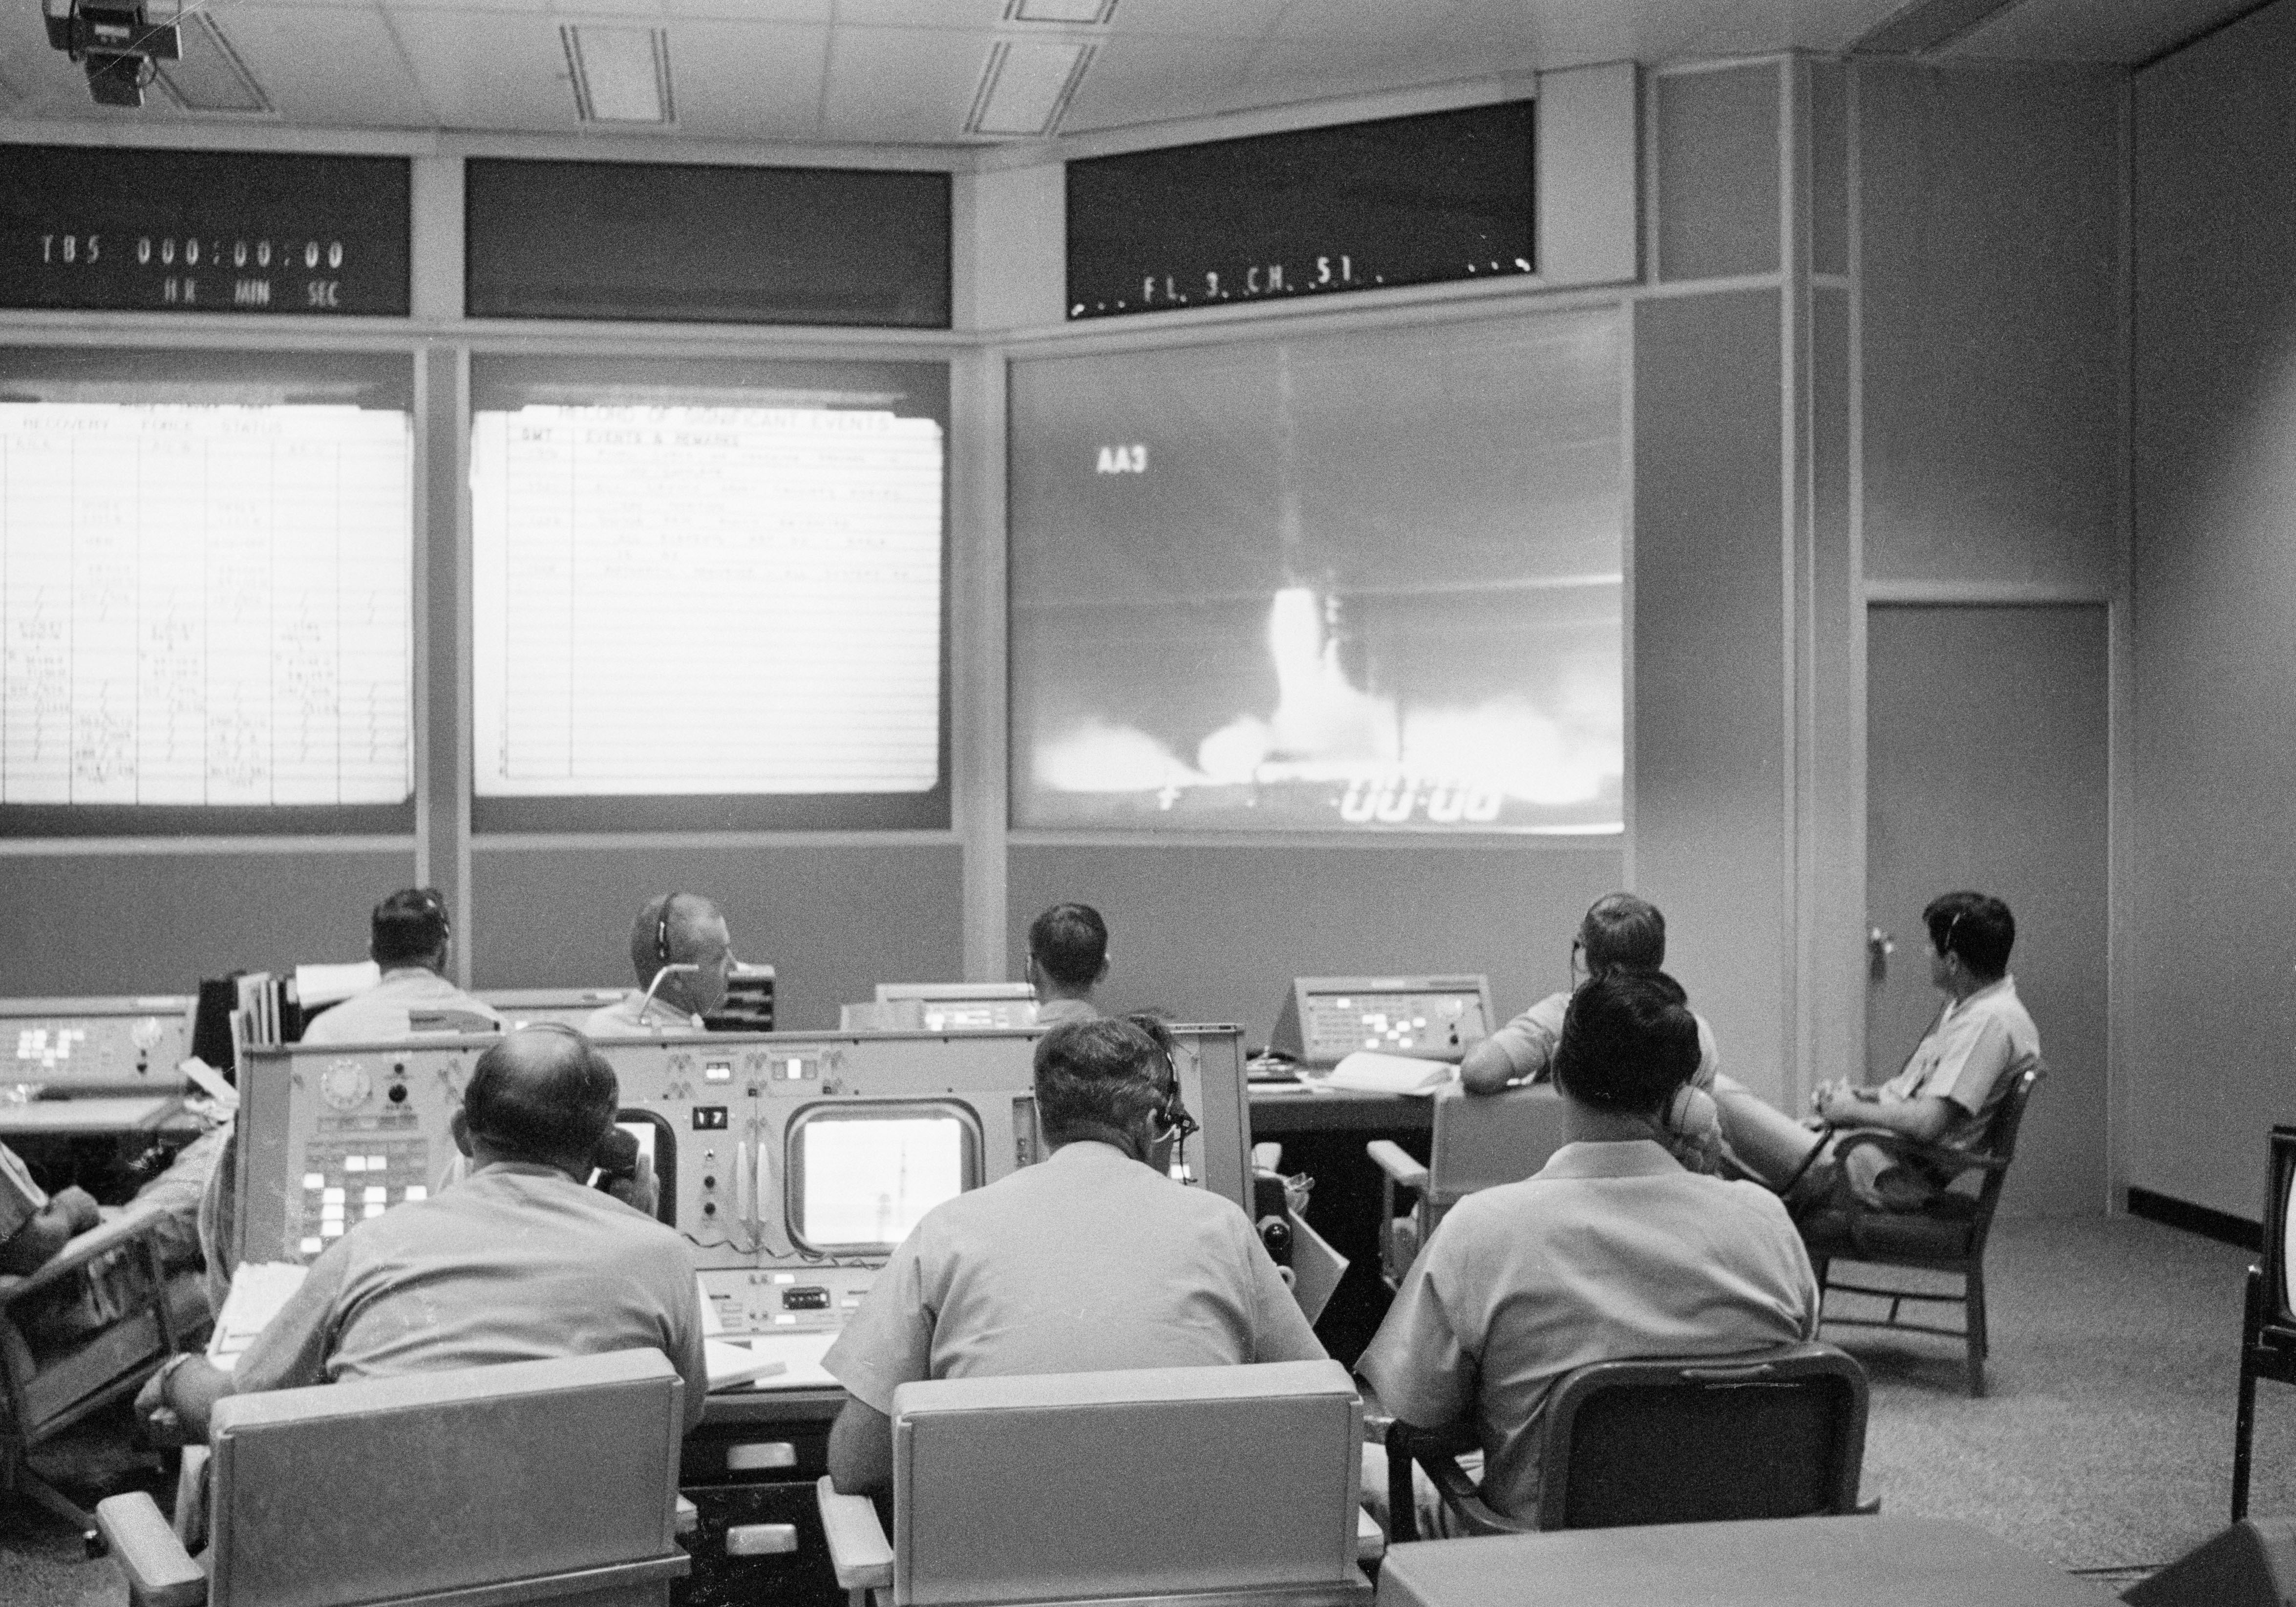 Engineers in the Mission Control Center at the Manned Spacecraft Center, now NASA’s Johnson Space Center in Houston, take over control of the flight once the tower is clear